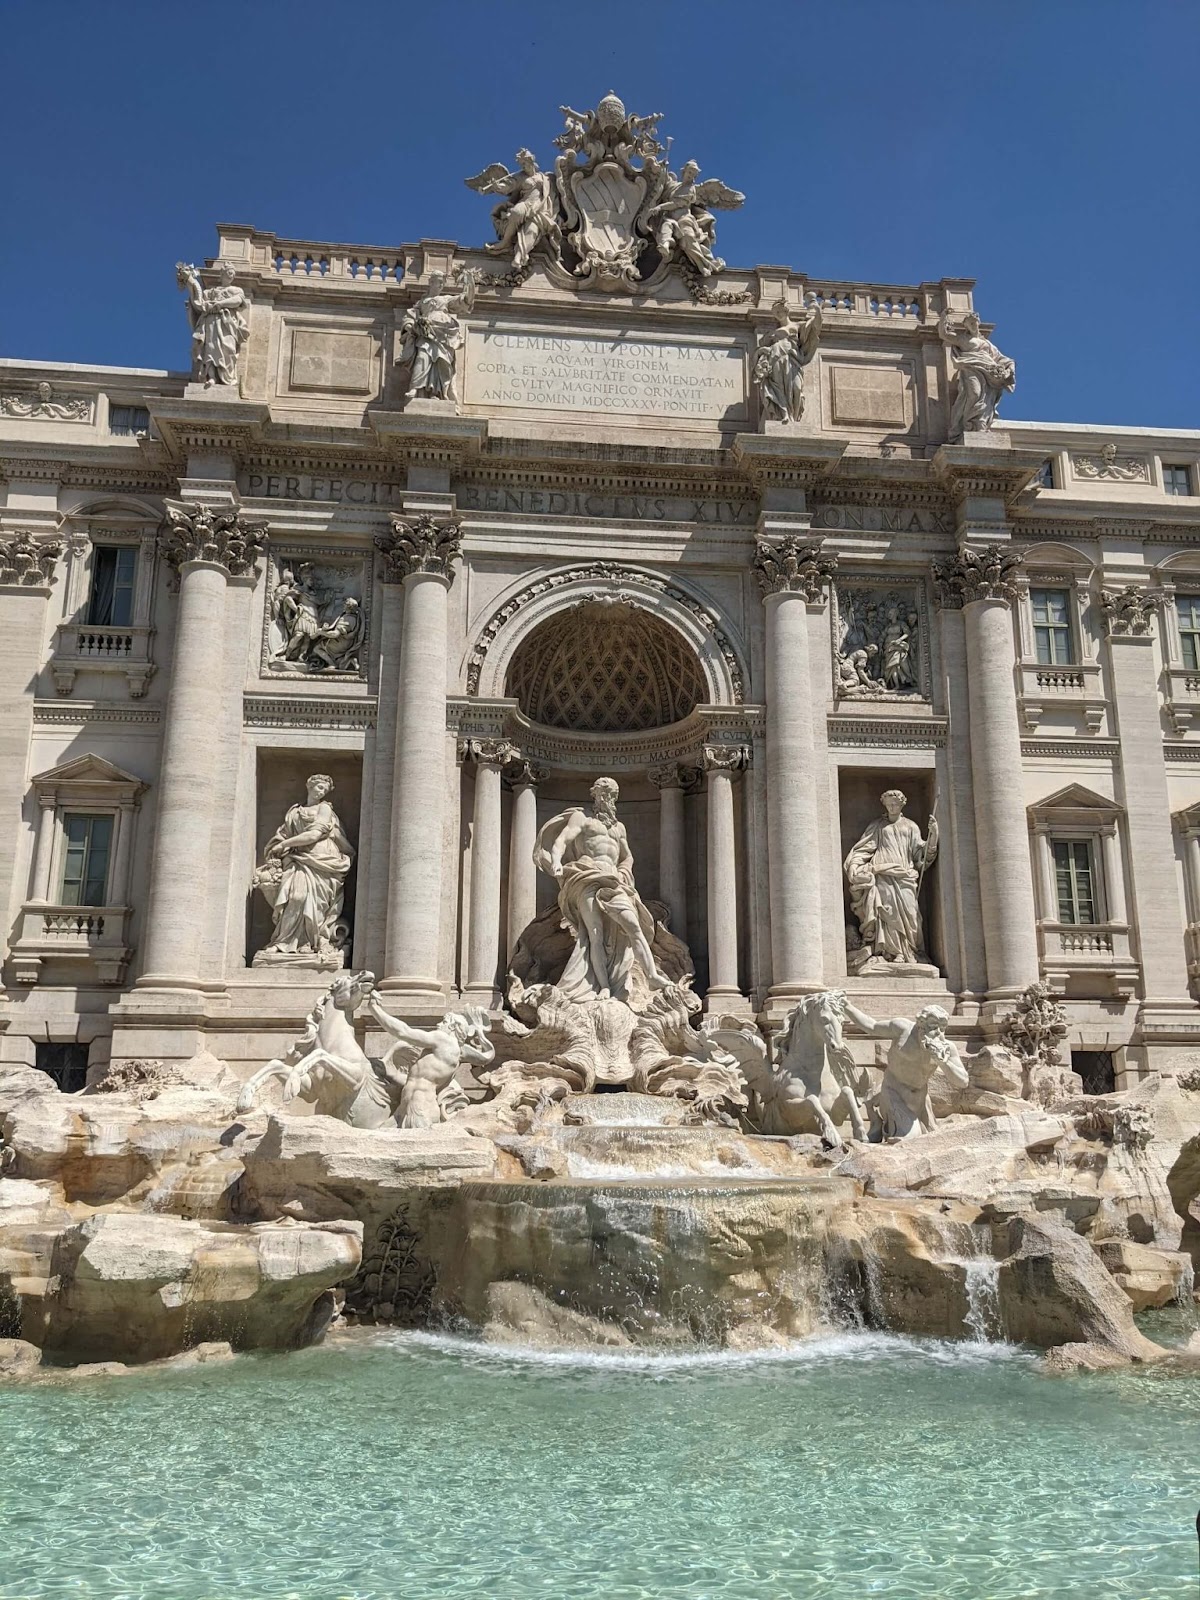 24 hours in Rome. An image of Trevi Fountain, the most photographed fountain in the world. Trevi Fountain is in Rome, Italy.